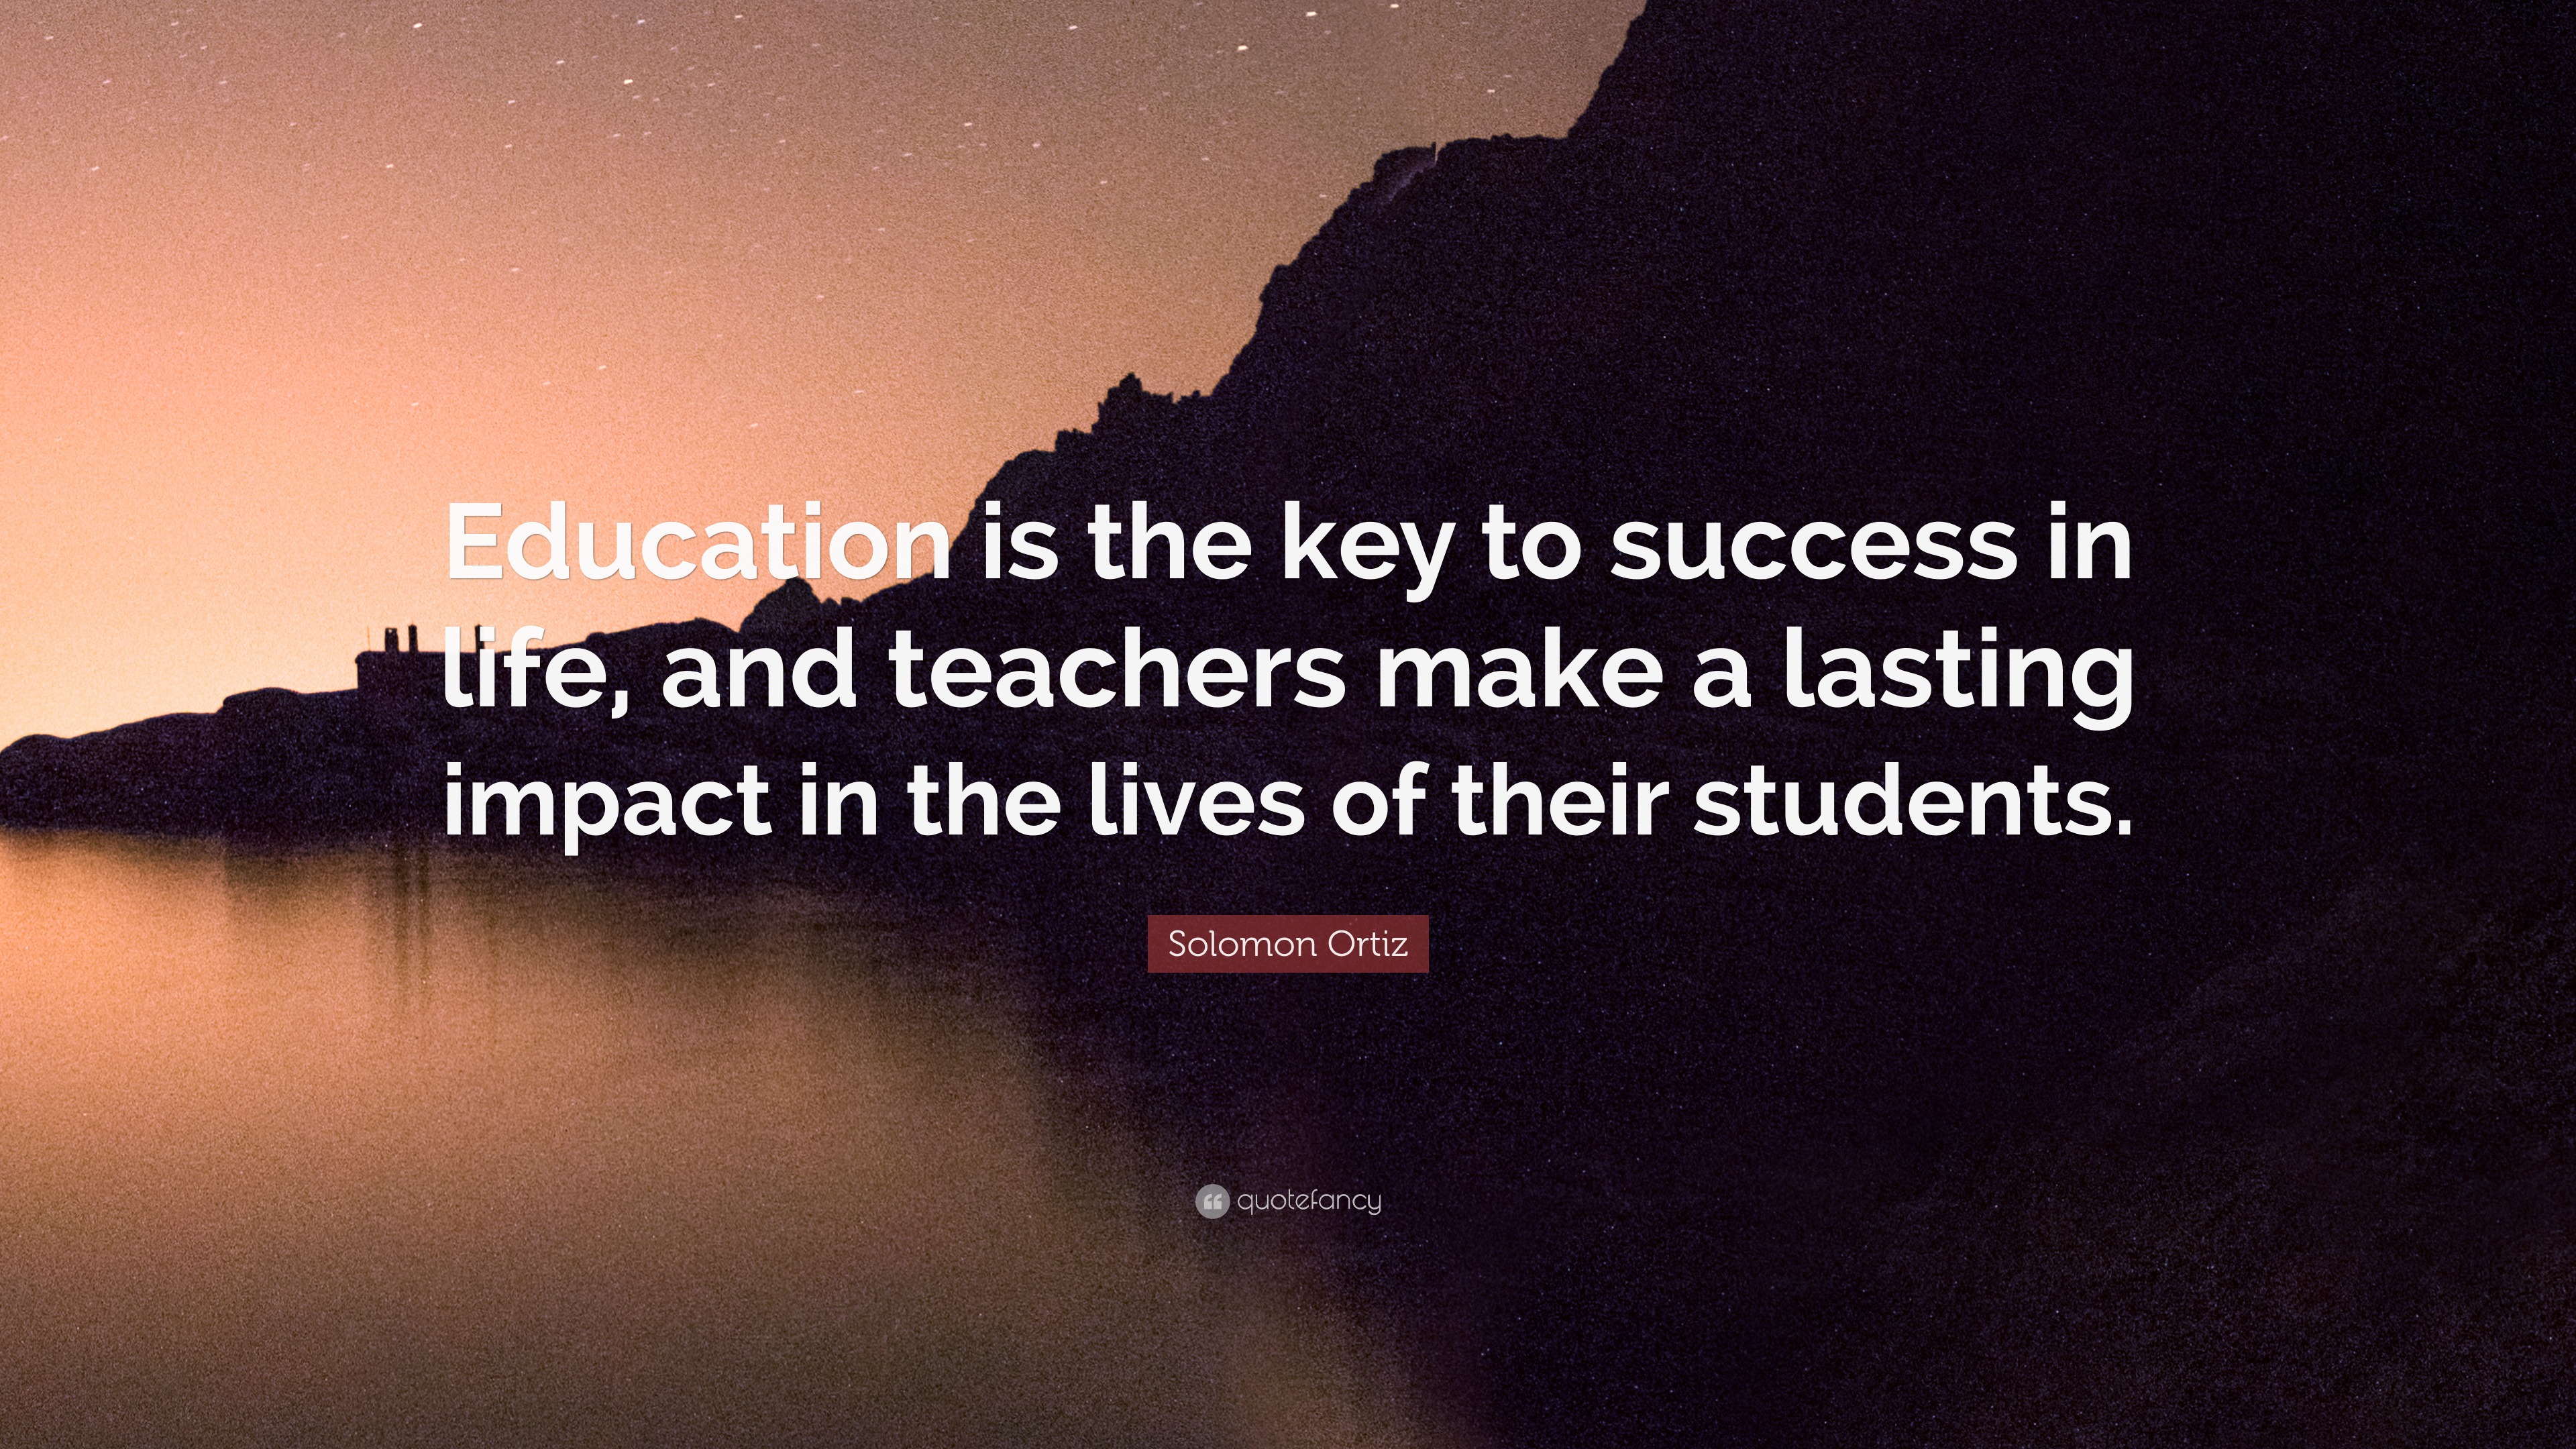 a good education is the key to a successful life